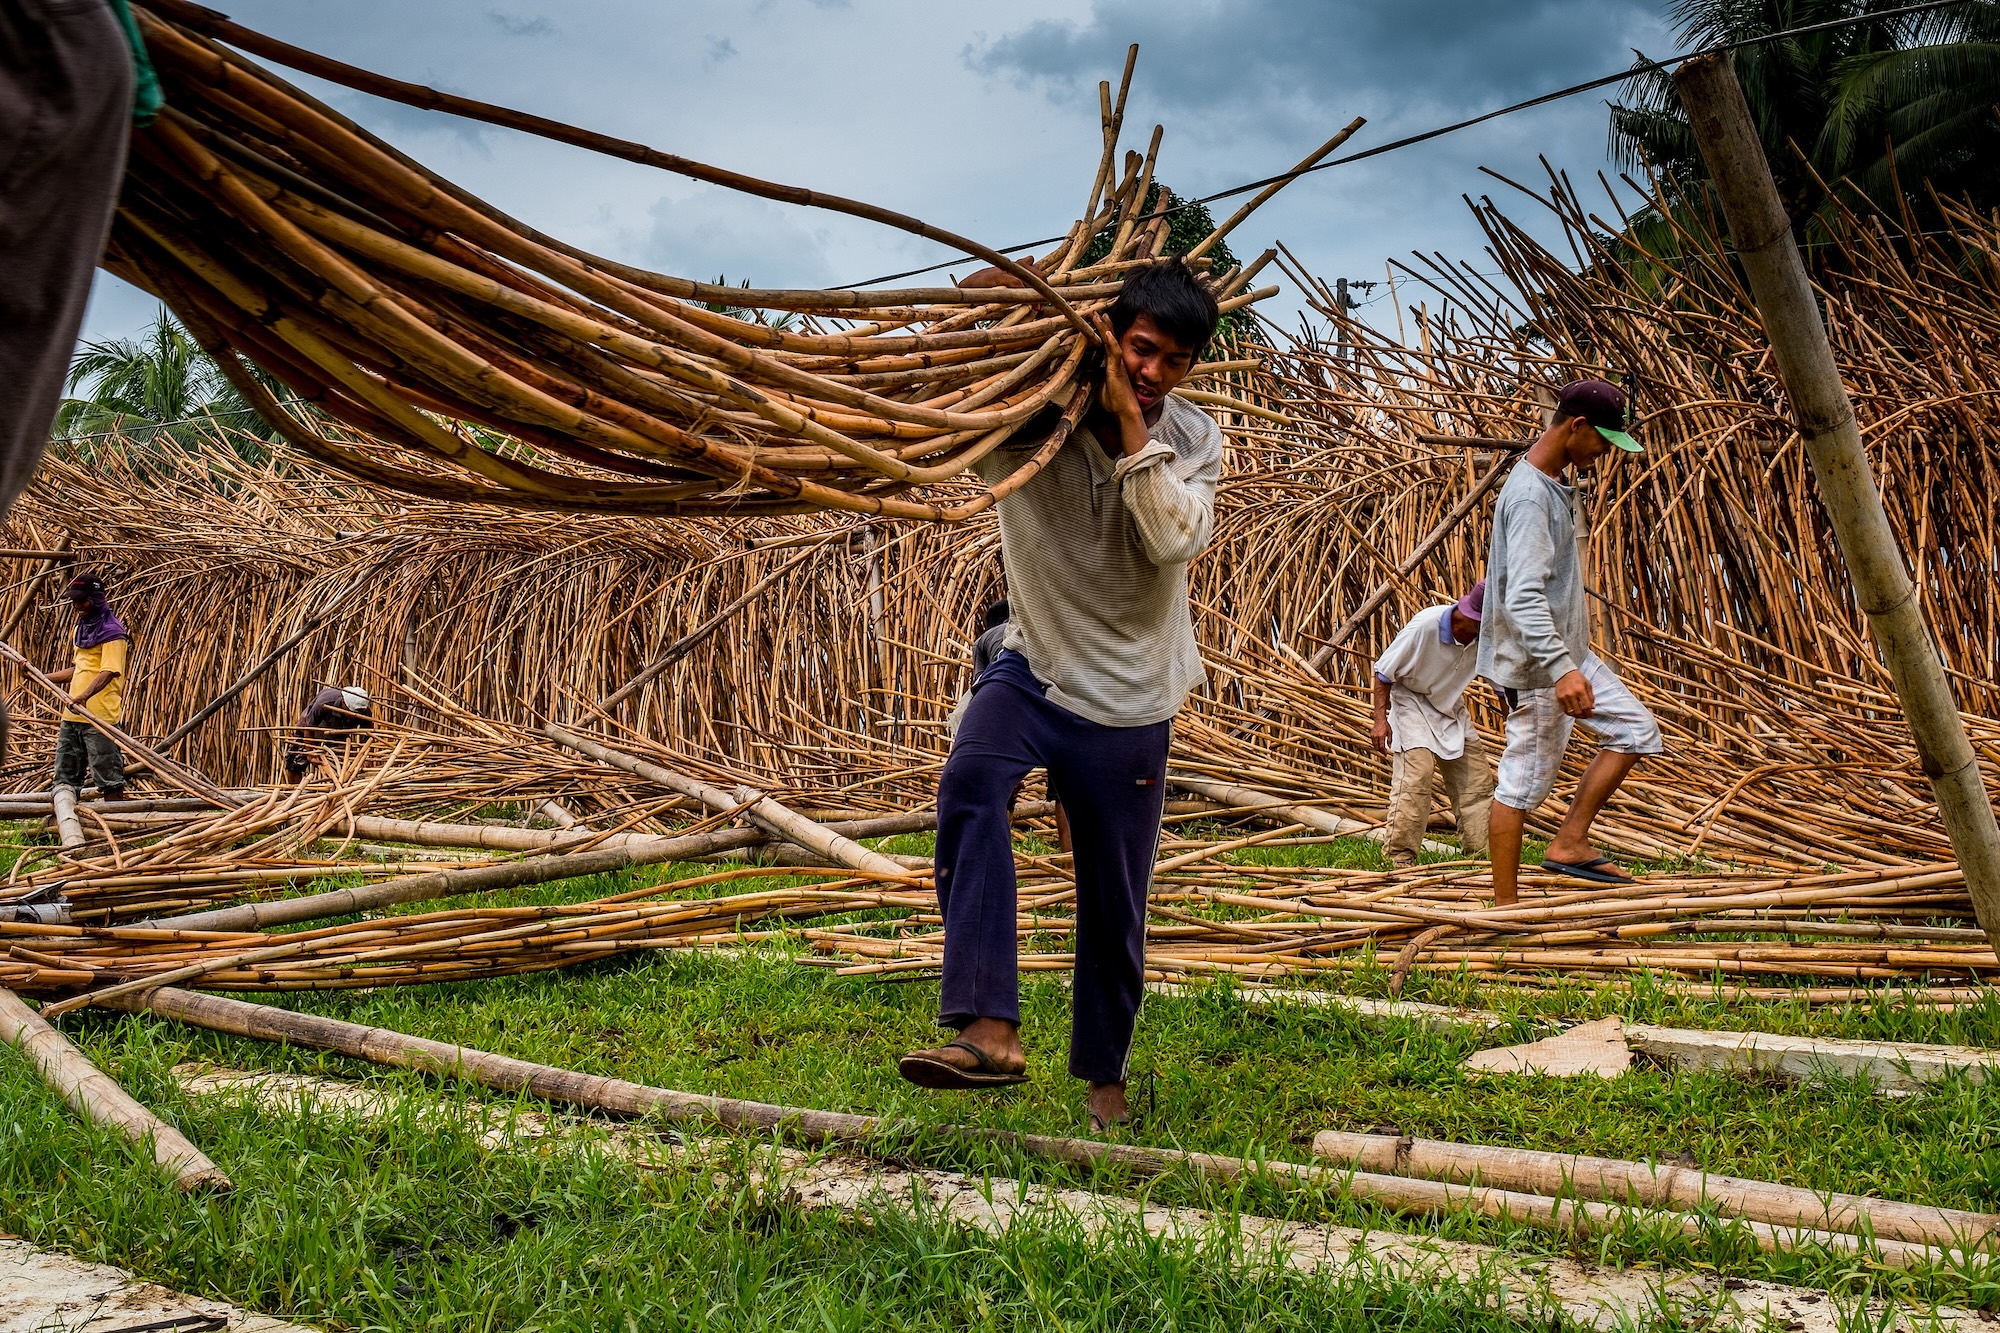 A Filipino man harvests rattan outdoors, hoisting a big bundle of it over his shoulder with more scattered on the ground around him and a field of more stems in the background.